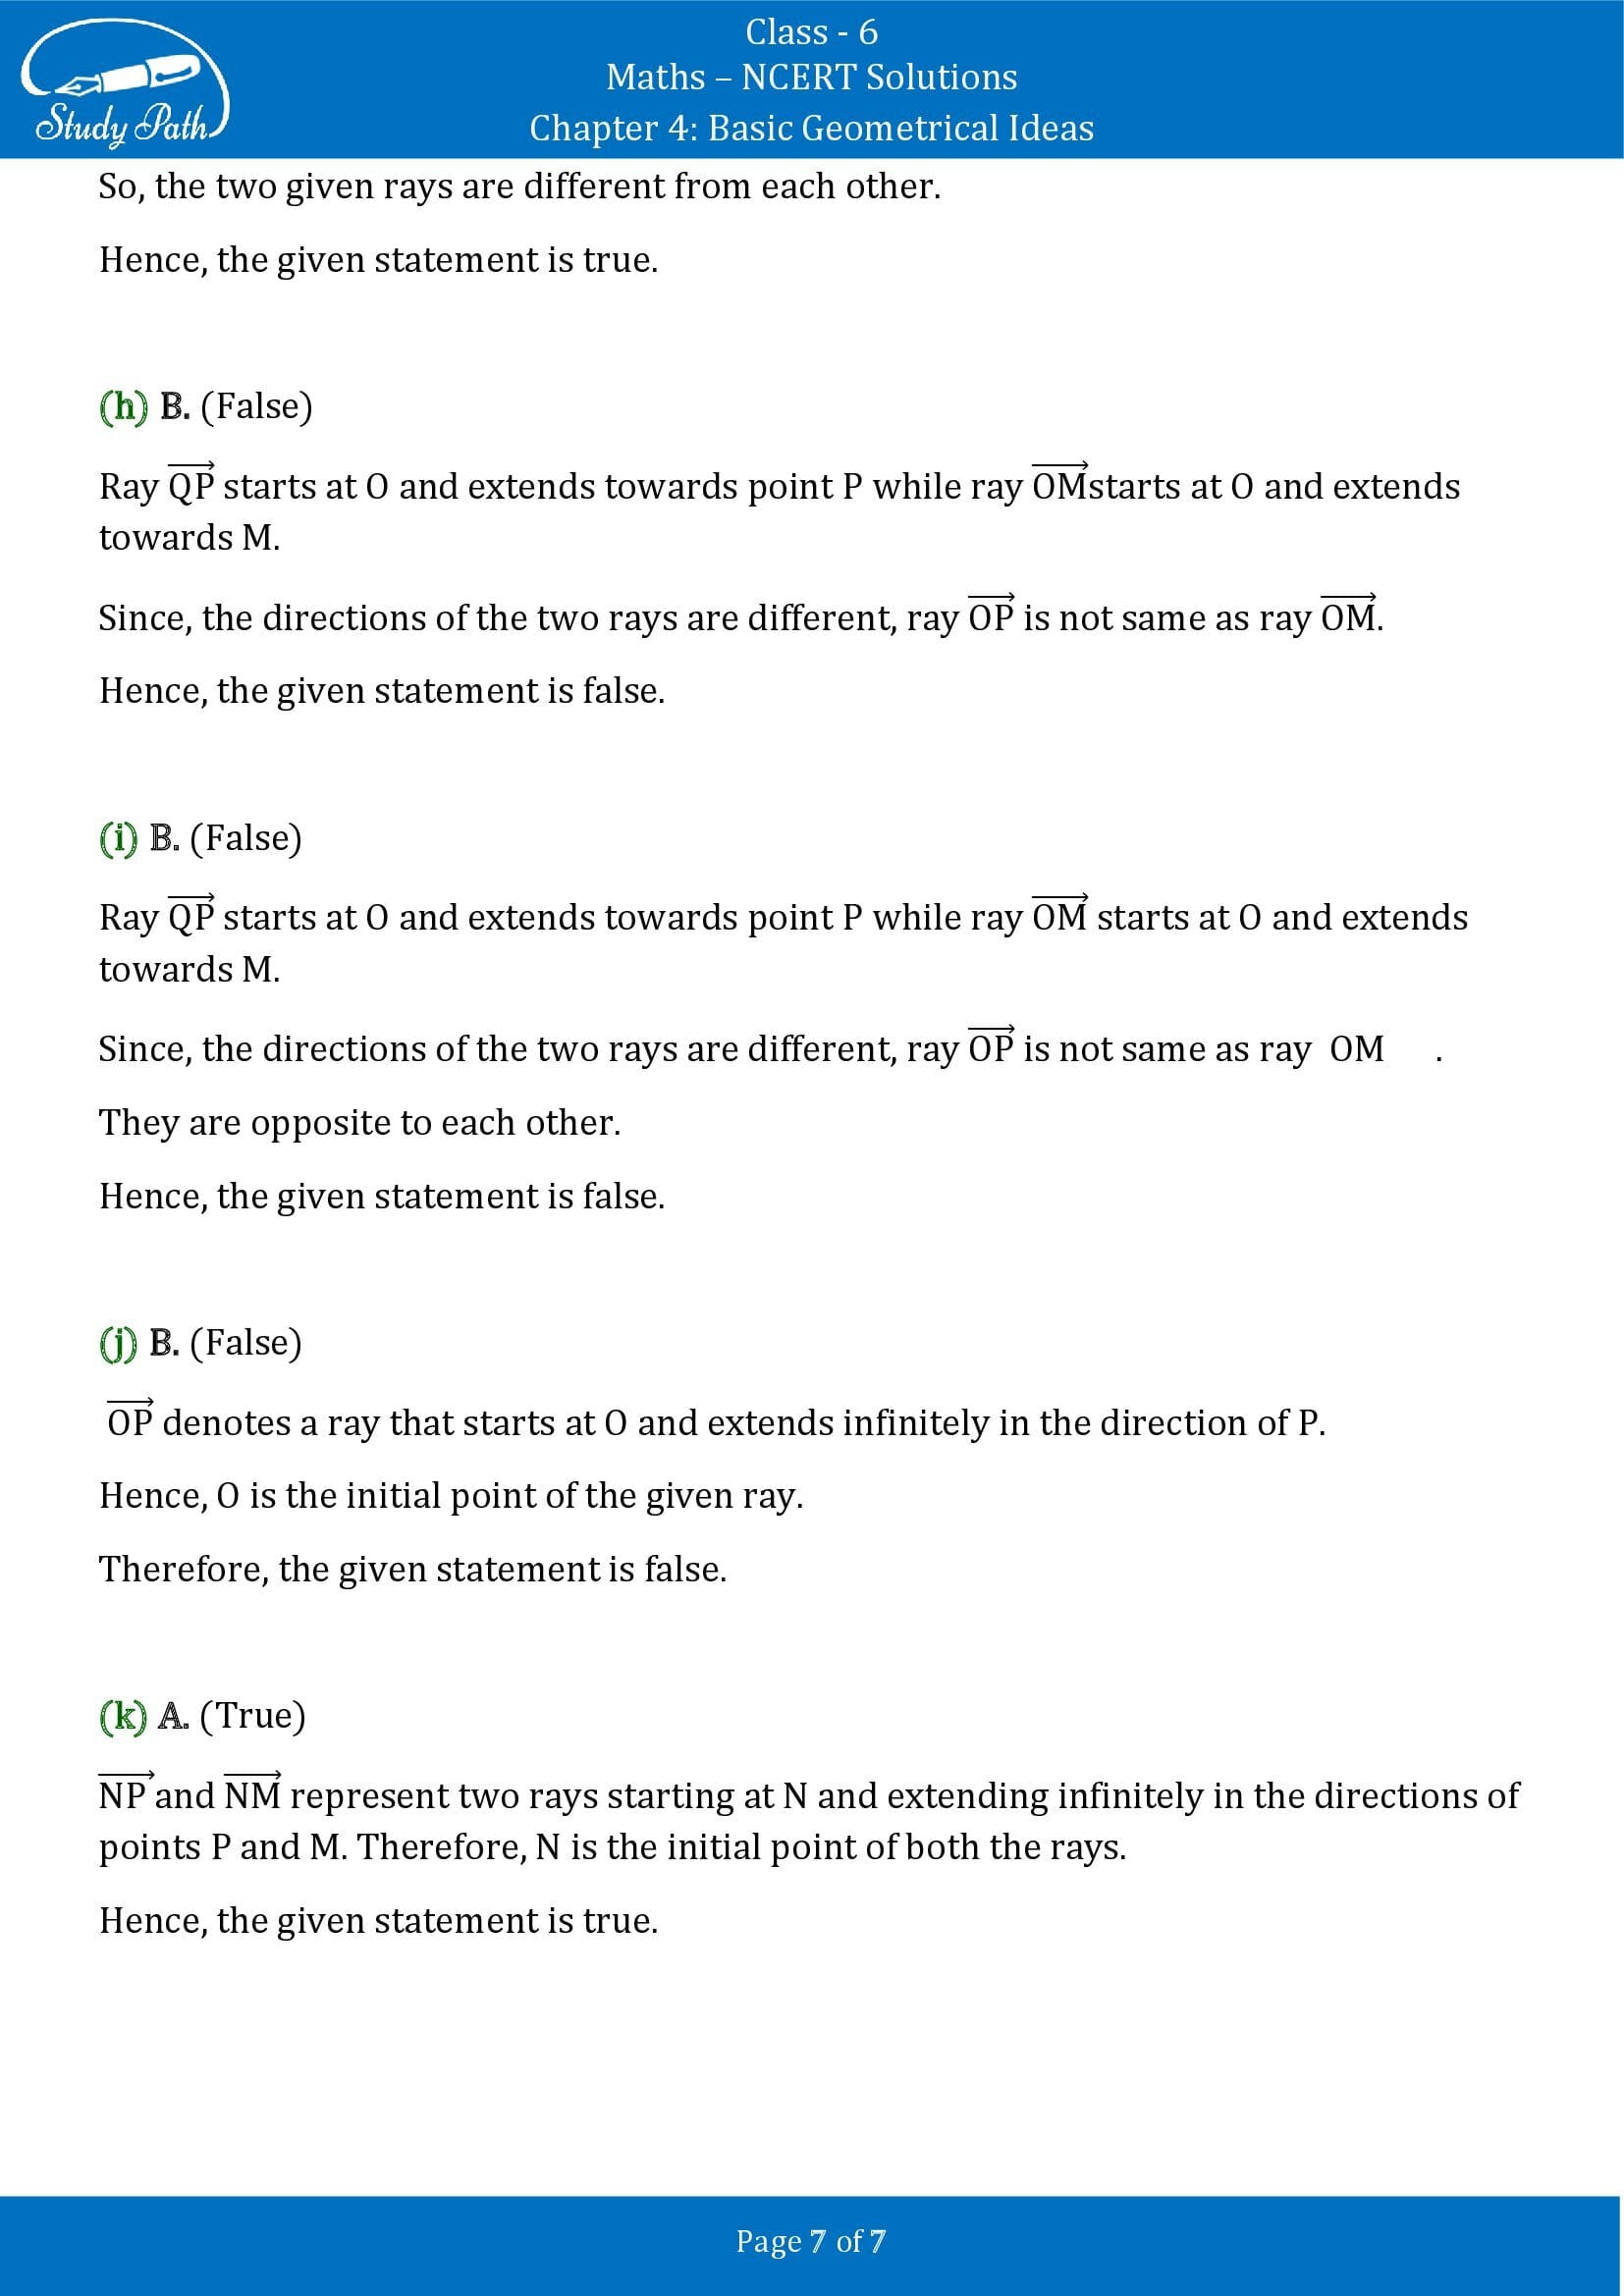 NCERT Solutions for Class 6 Maths Chapter 4 Basic Geometrical Ideas Exercise 4.1 00007